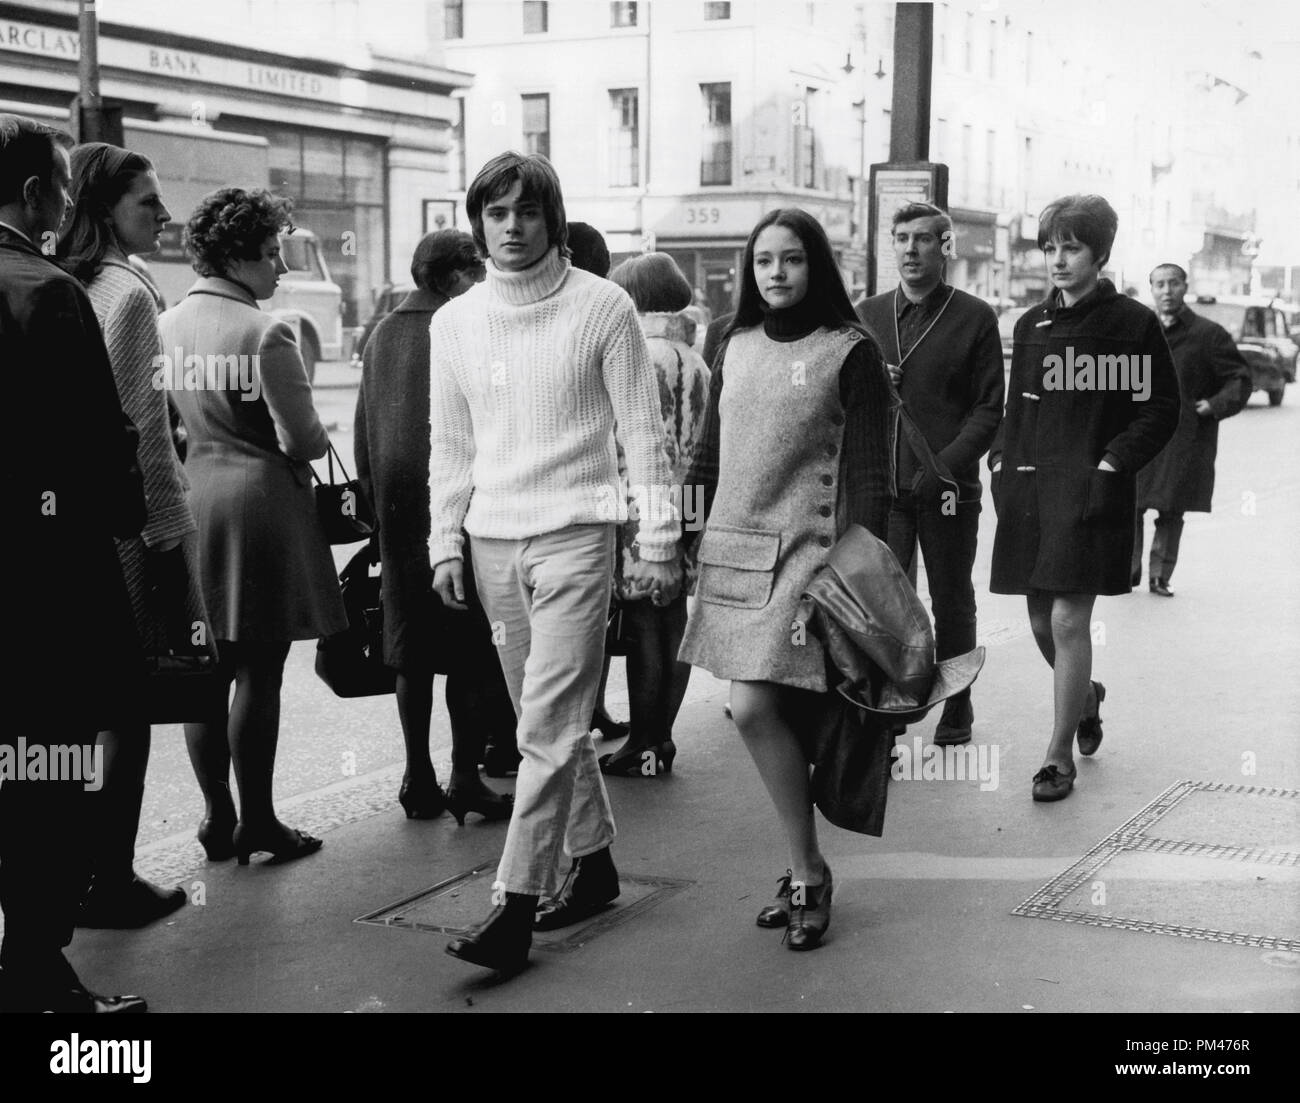 Sixteen year old Olivia Hussey and seventeen year old Leonard Whiting, stars of 'Romeo and Juliet', March 1968.   File Reference # 1106 013THA © JRC /The Hollywood Archive - All Rights Reserved Stock Photo